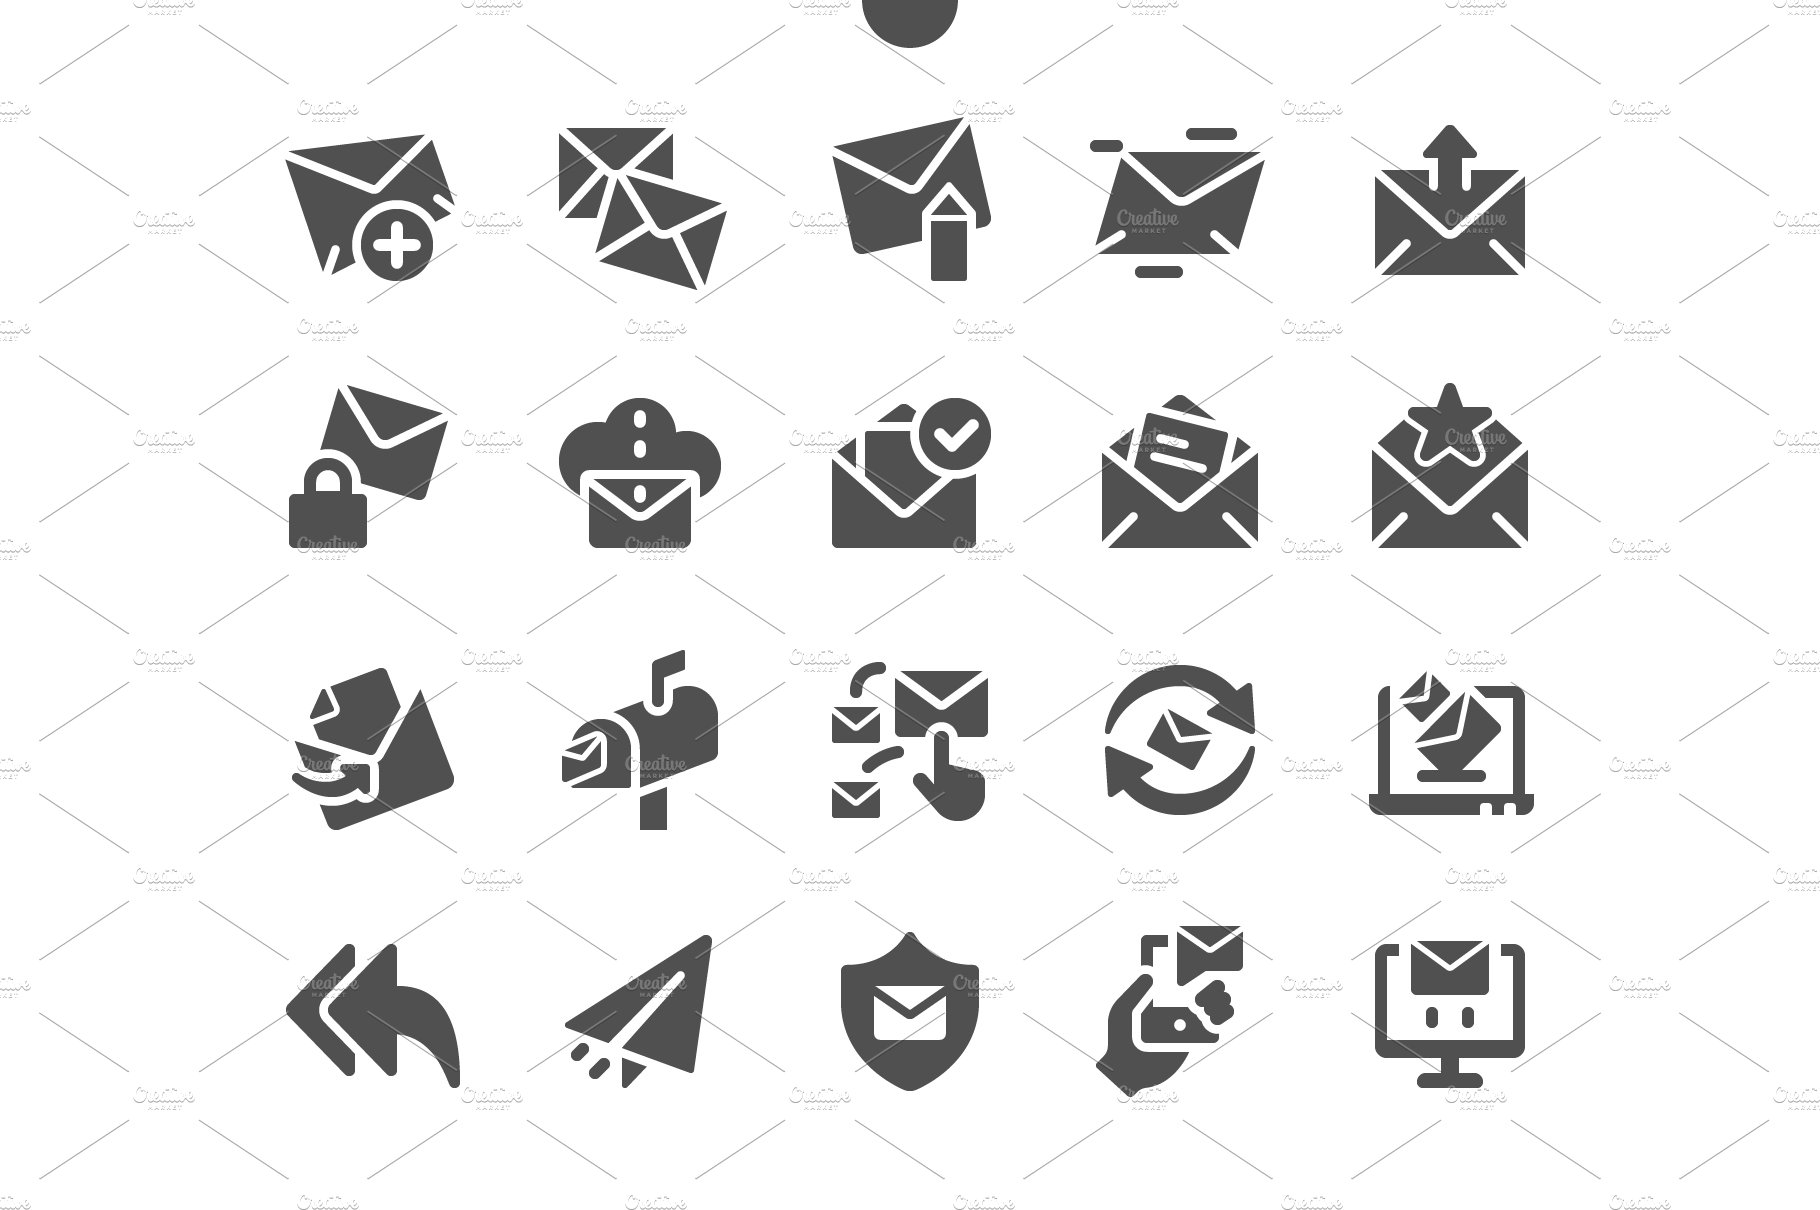 Email Icons cover image.